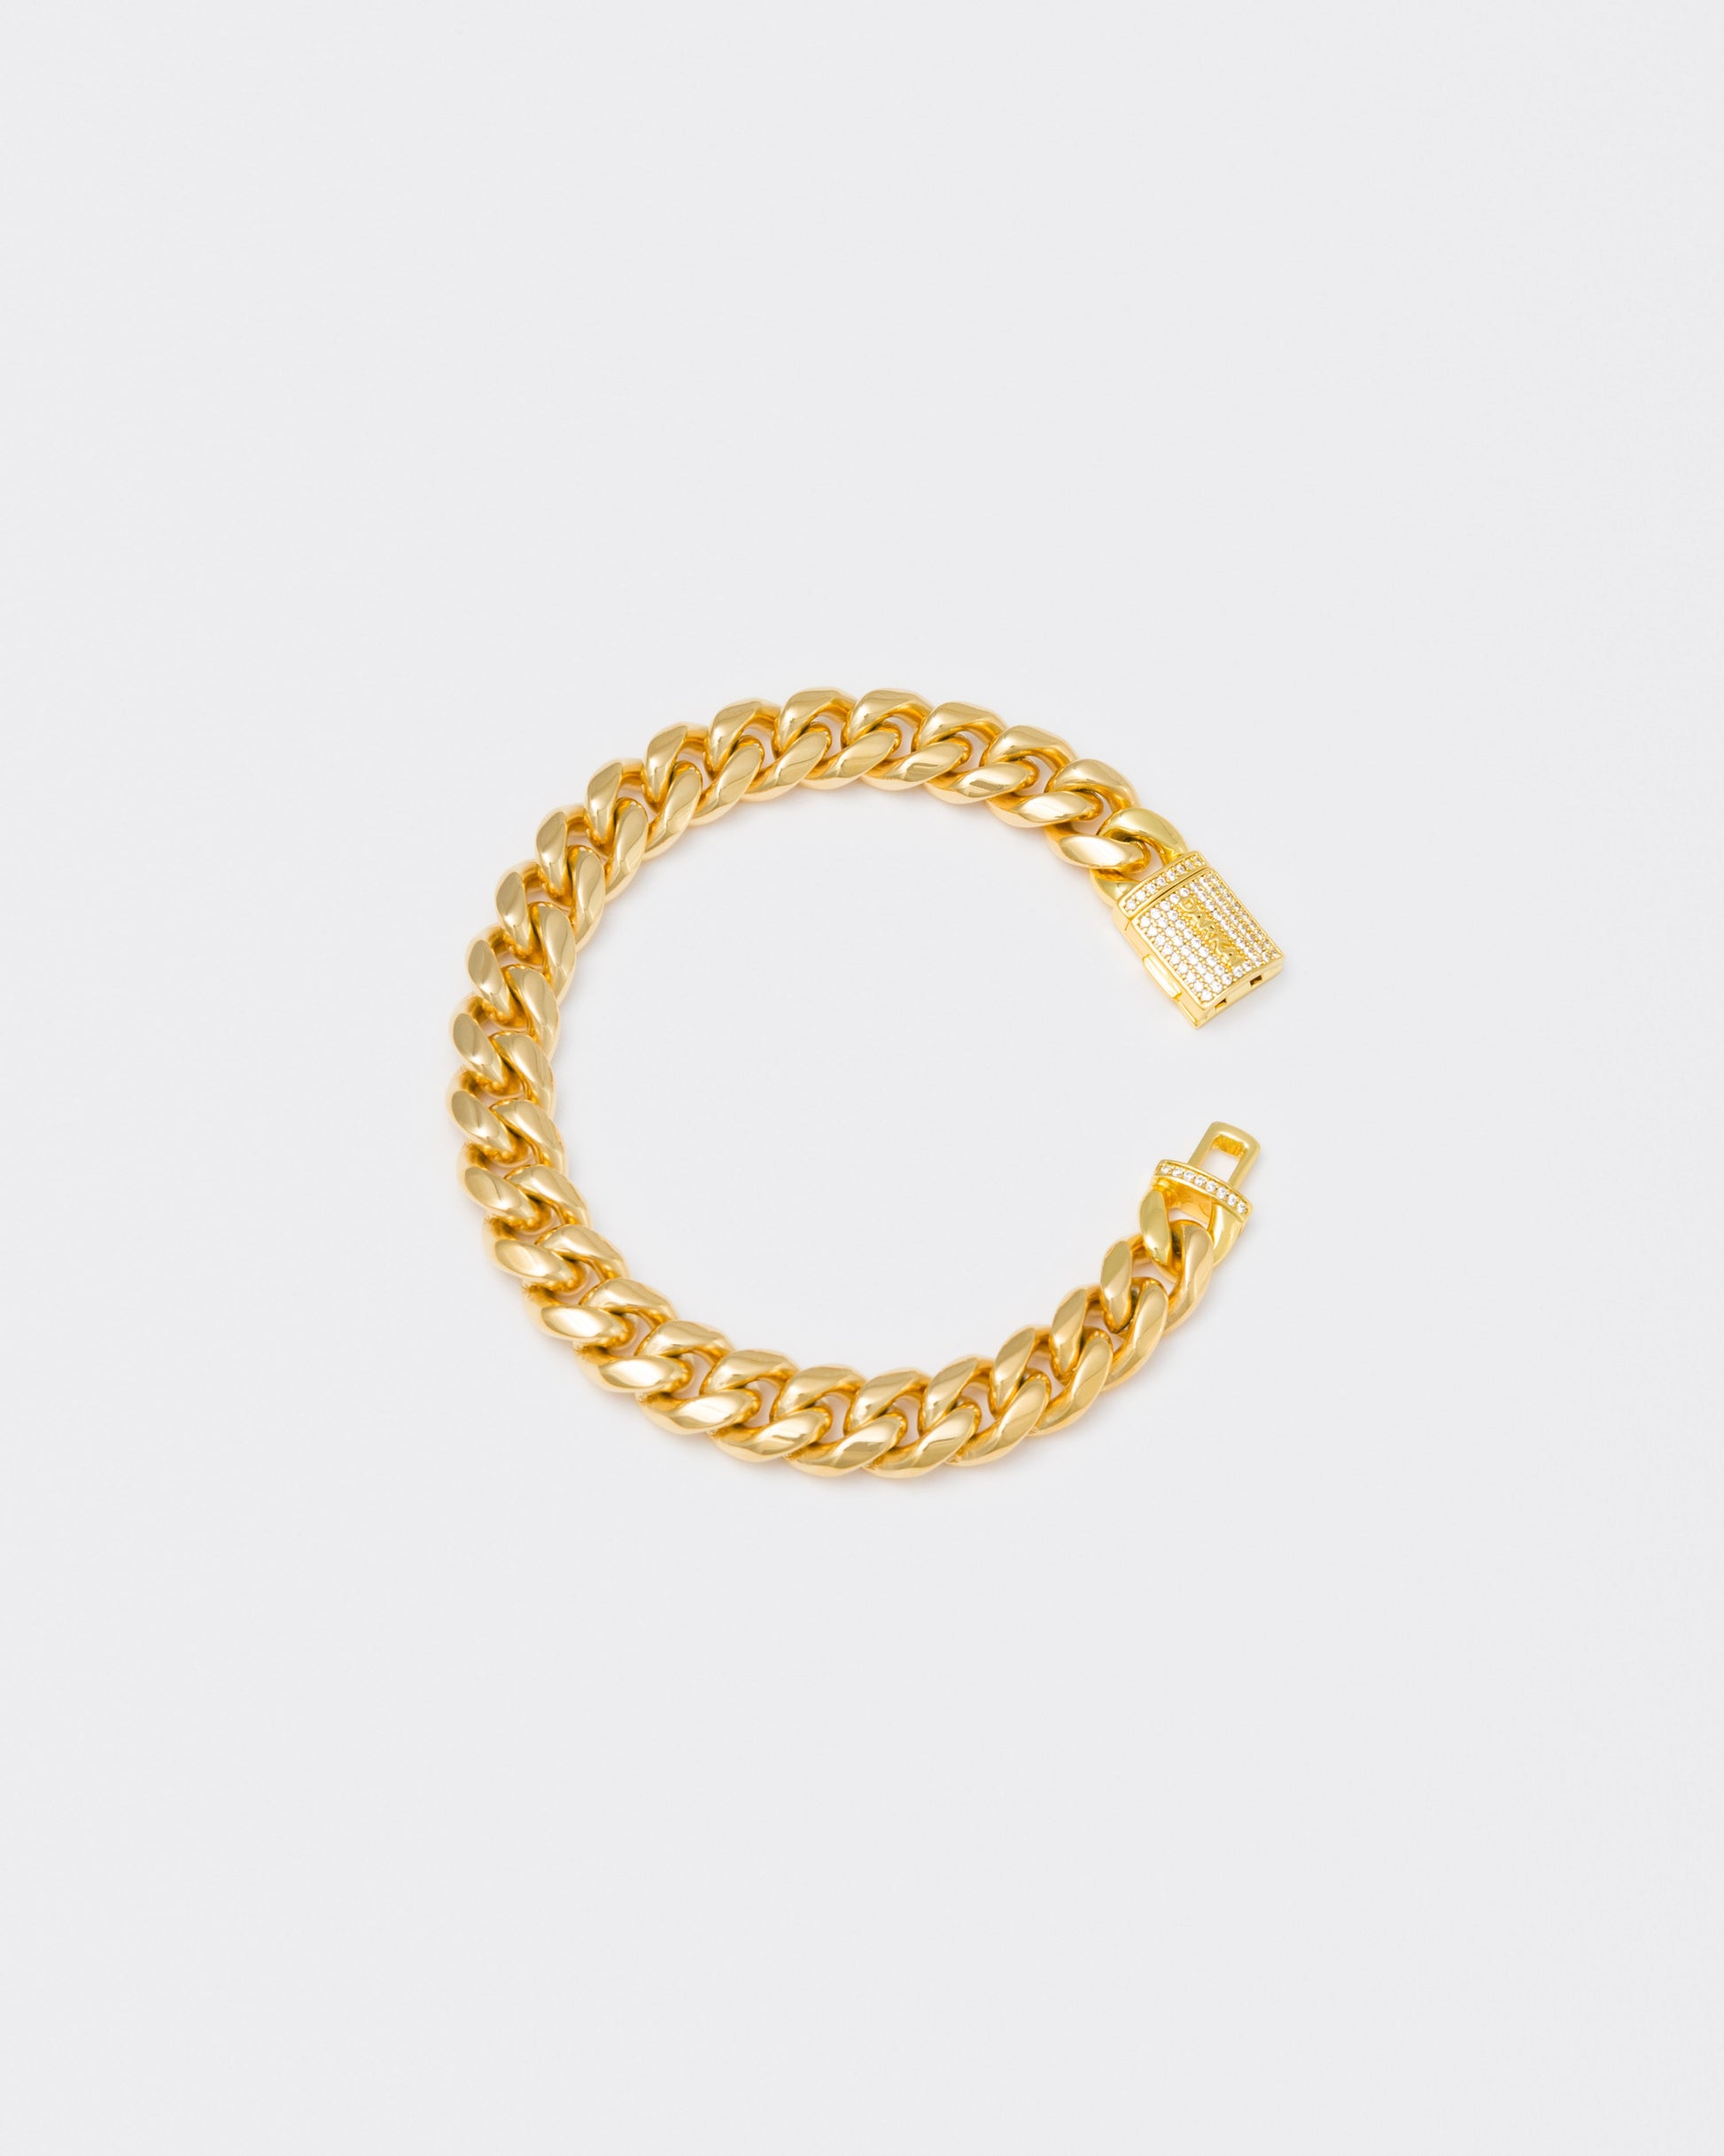 18k yellow gold coated cuban chain bracelet with hand-set micropavé stones in white